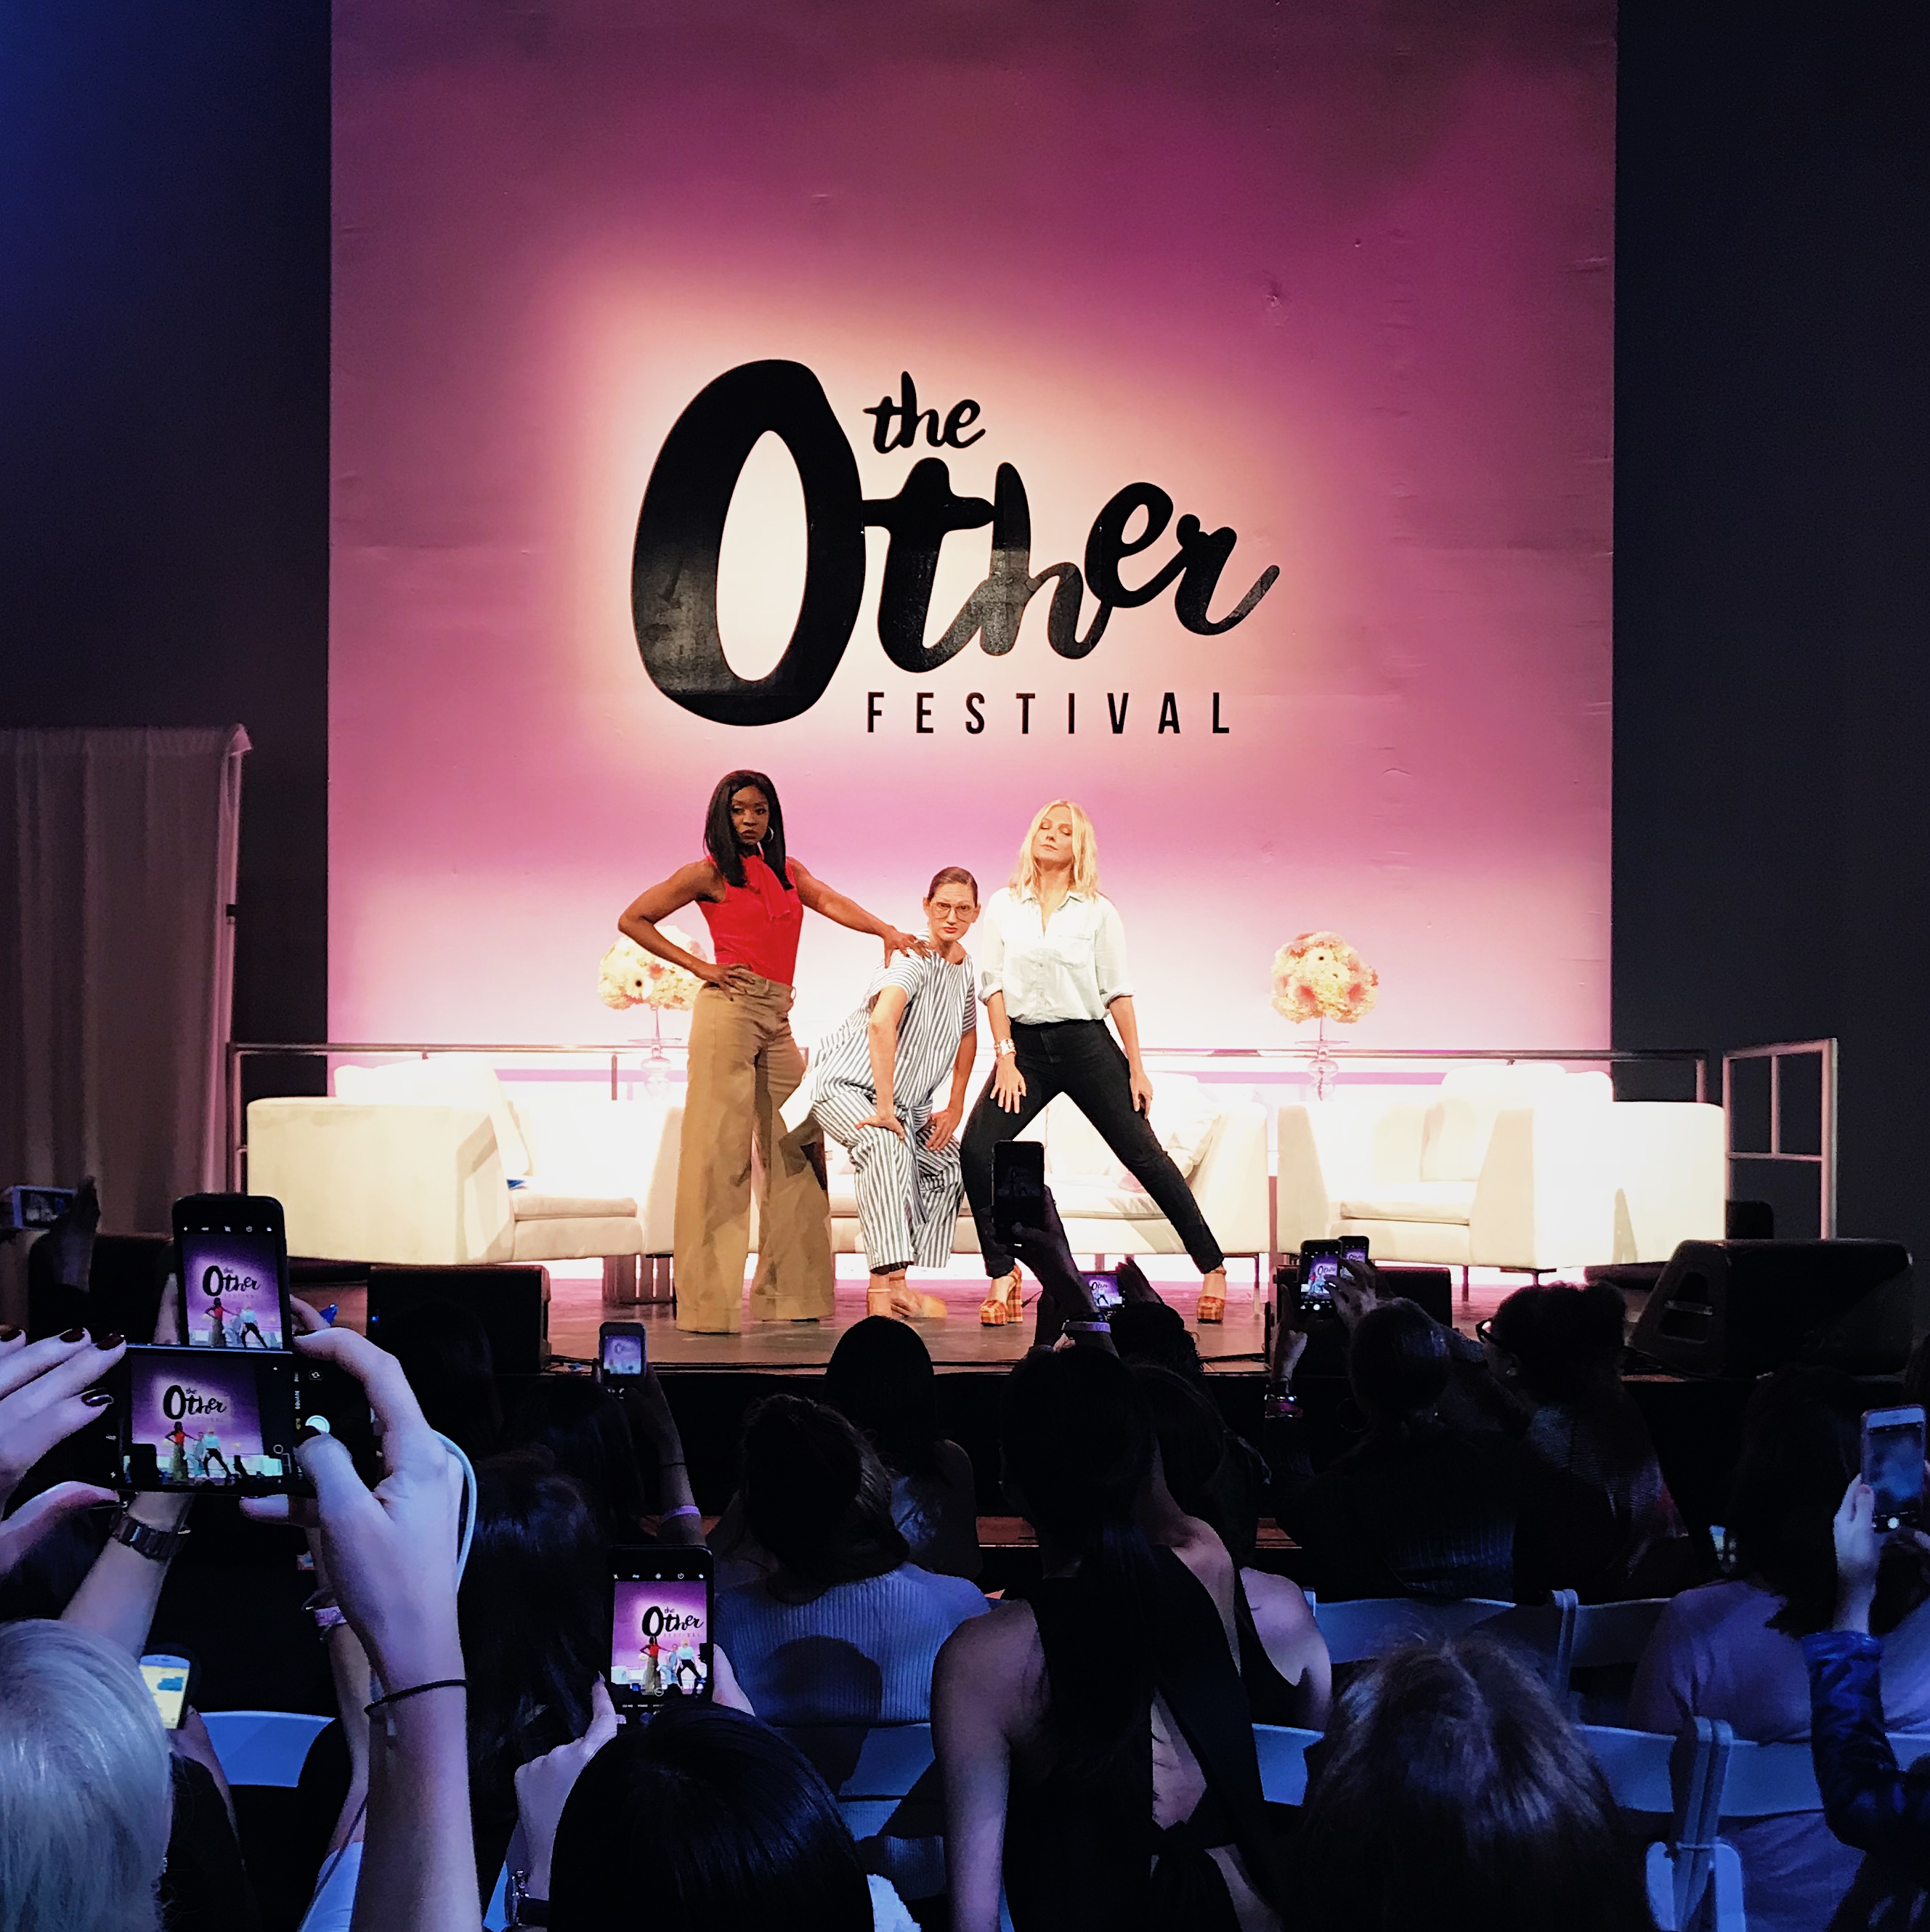 Jenna Lyons and Laura Brown at The Other Festival